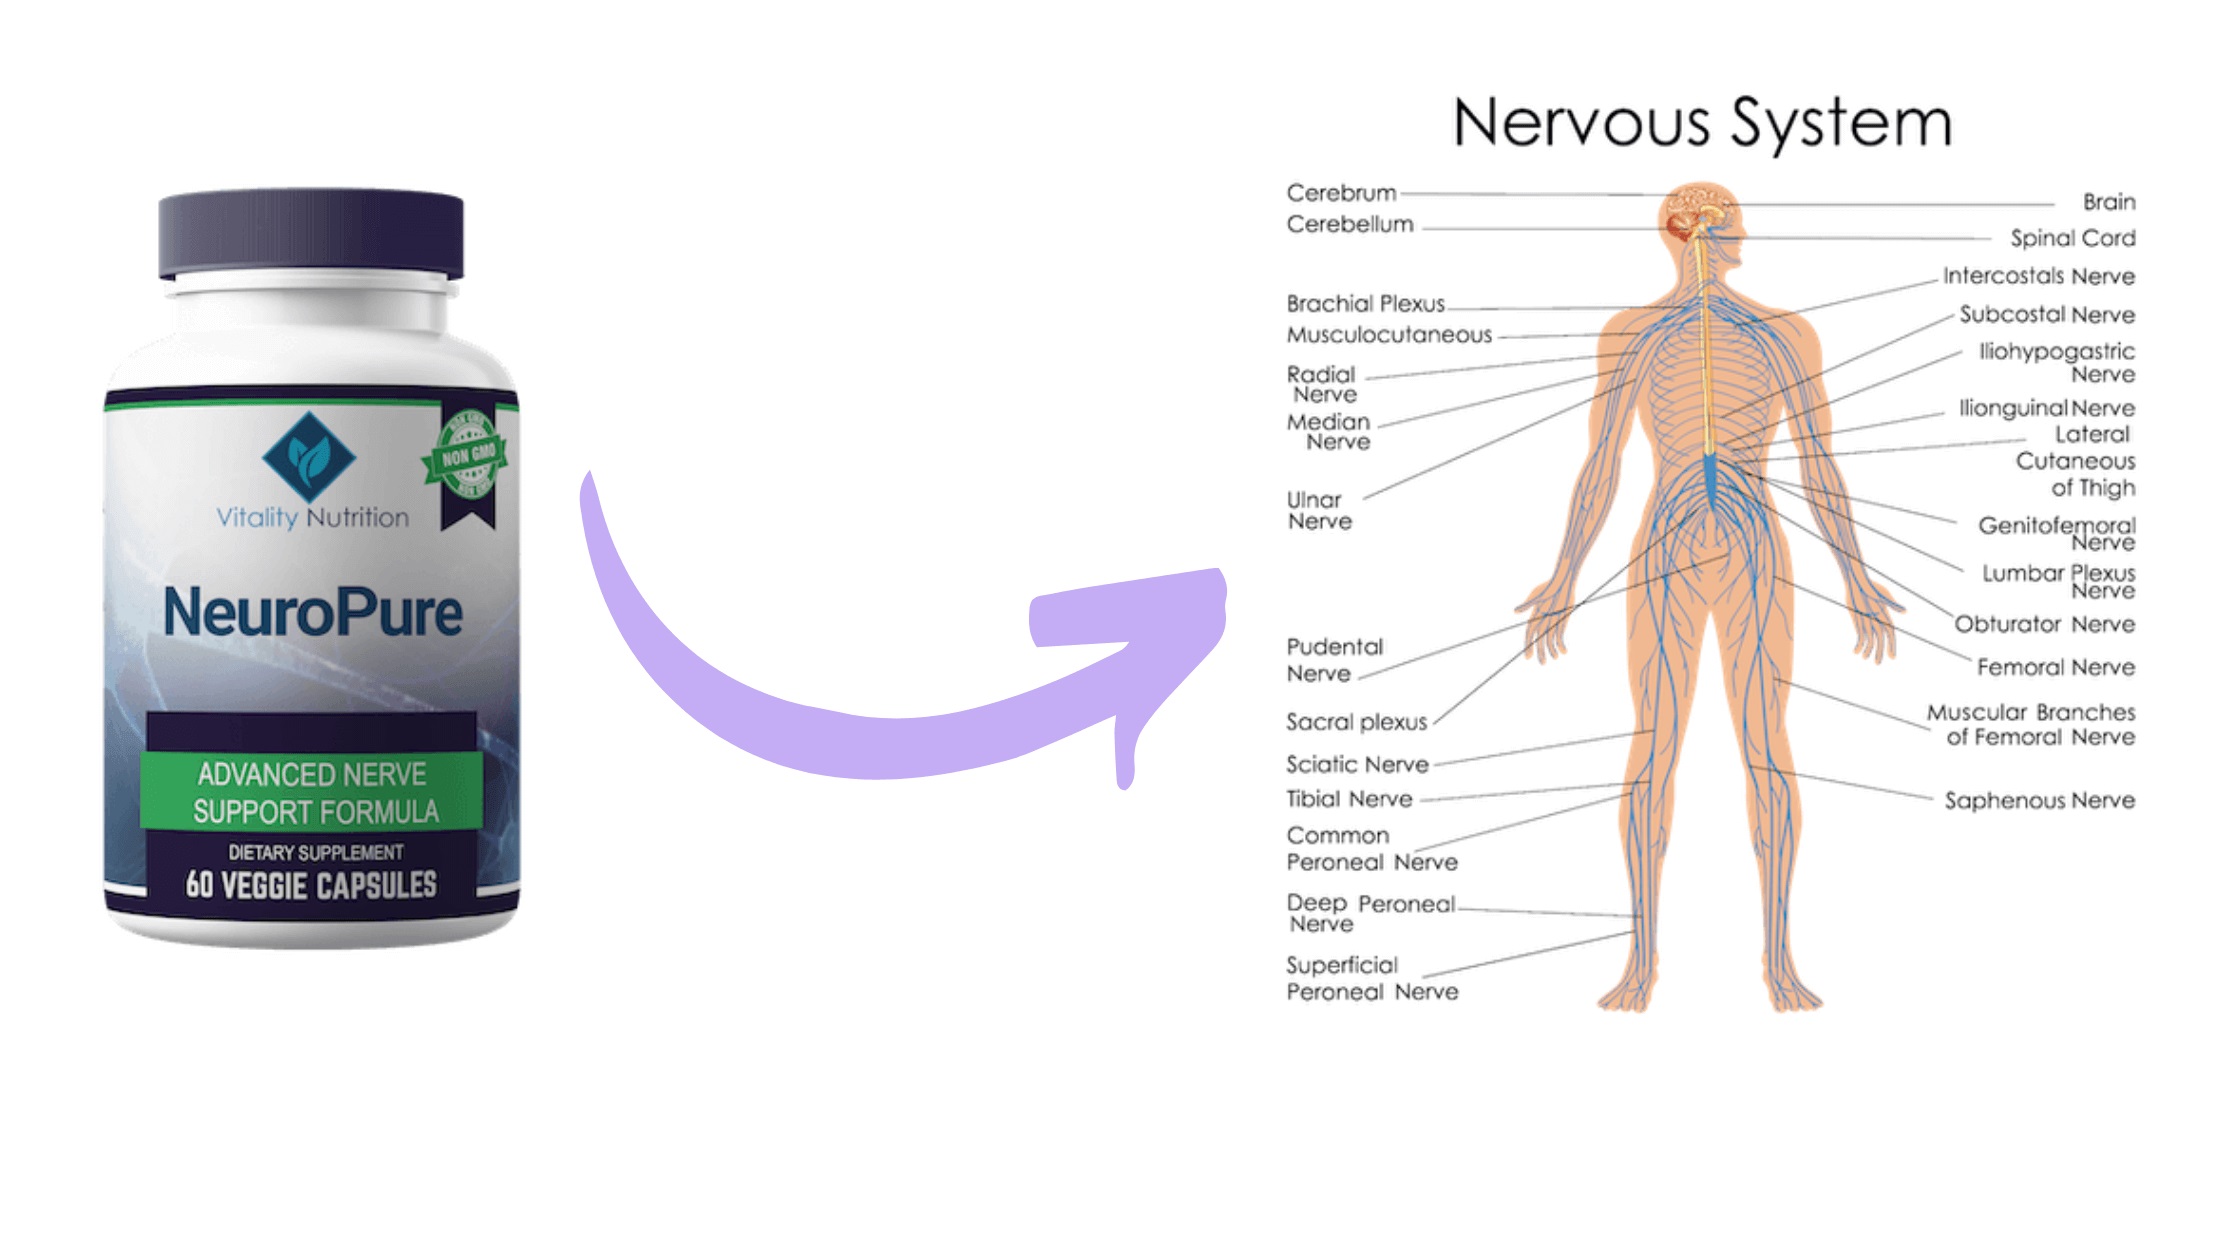 NeuroPure Reviews: How Much Effective Is Vitality Nutrition Neuro Pure? - Business